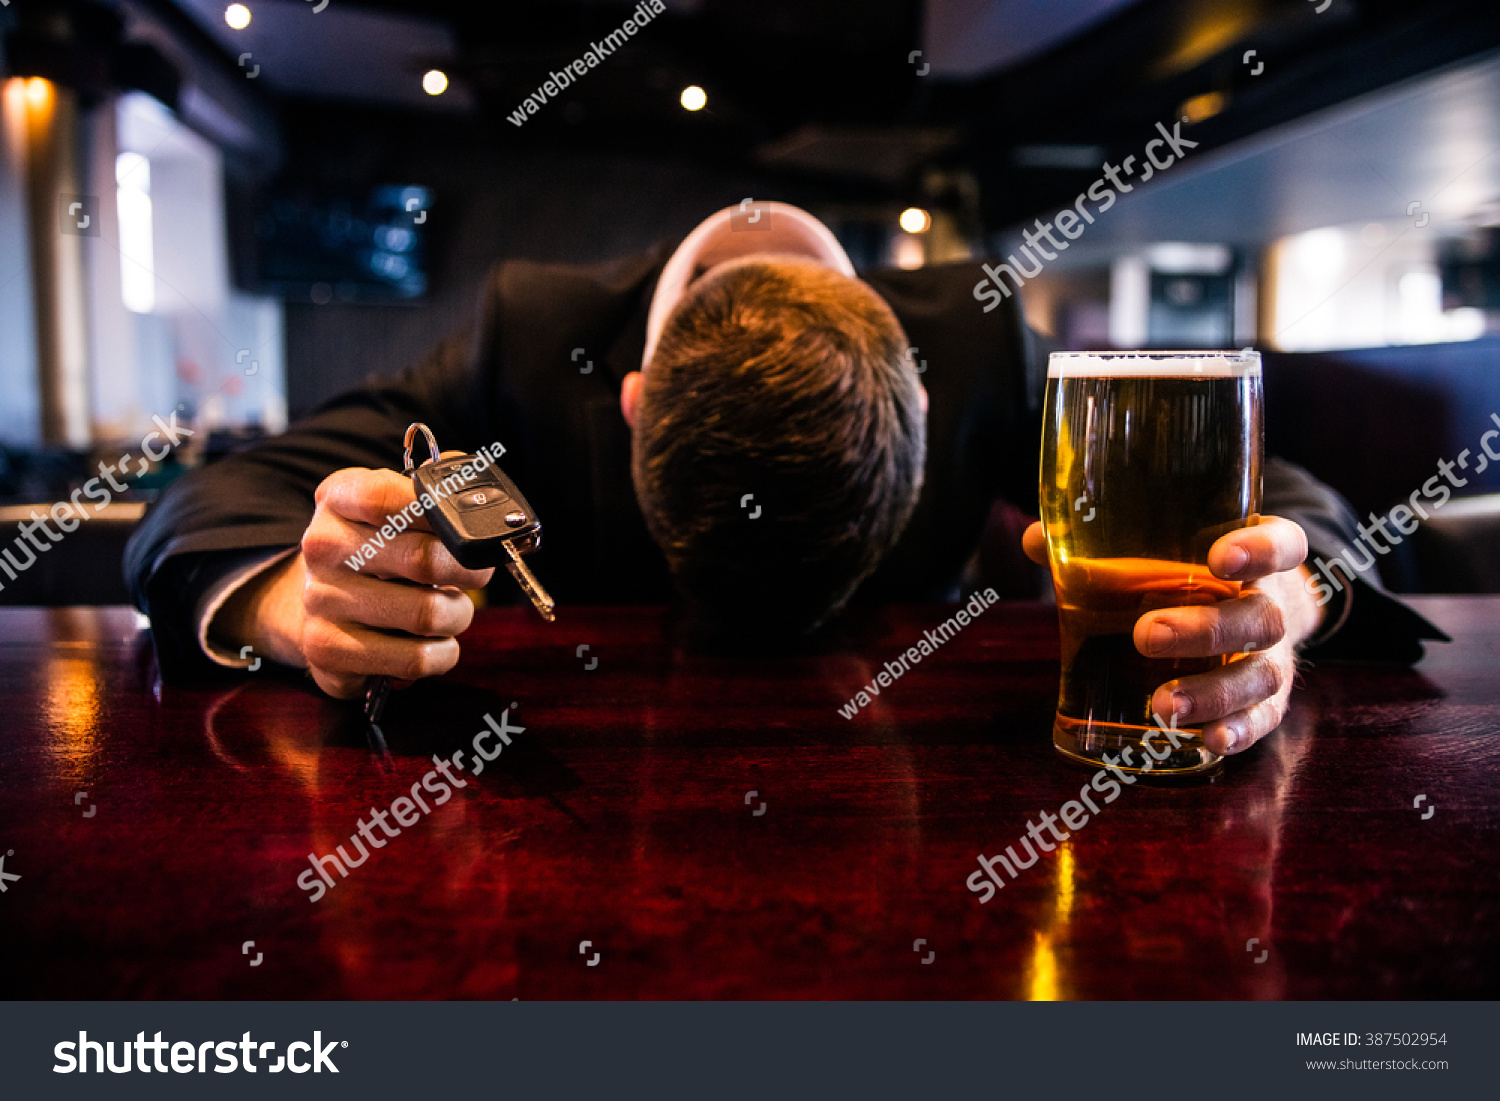 Drunk Man Holding A Beer And Car Keys In A Bar Stock Photo 387502954 ...